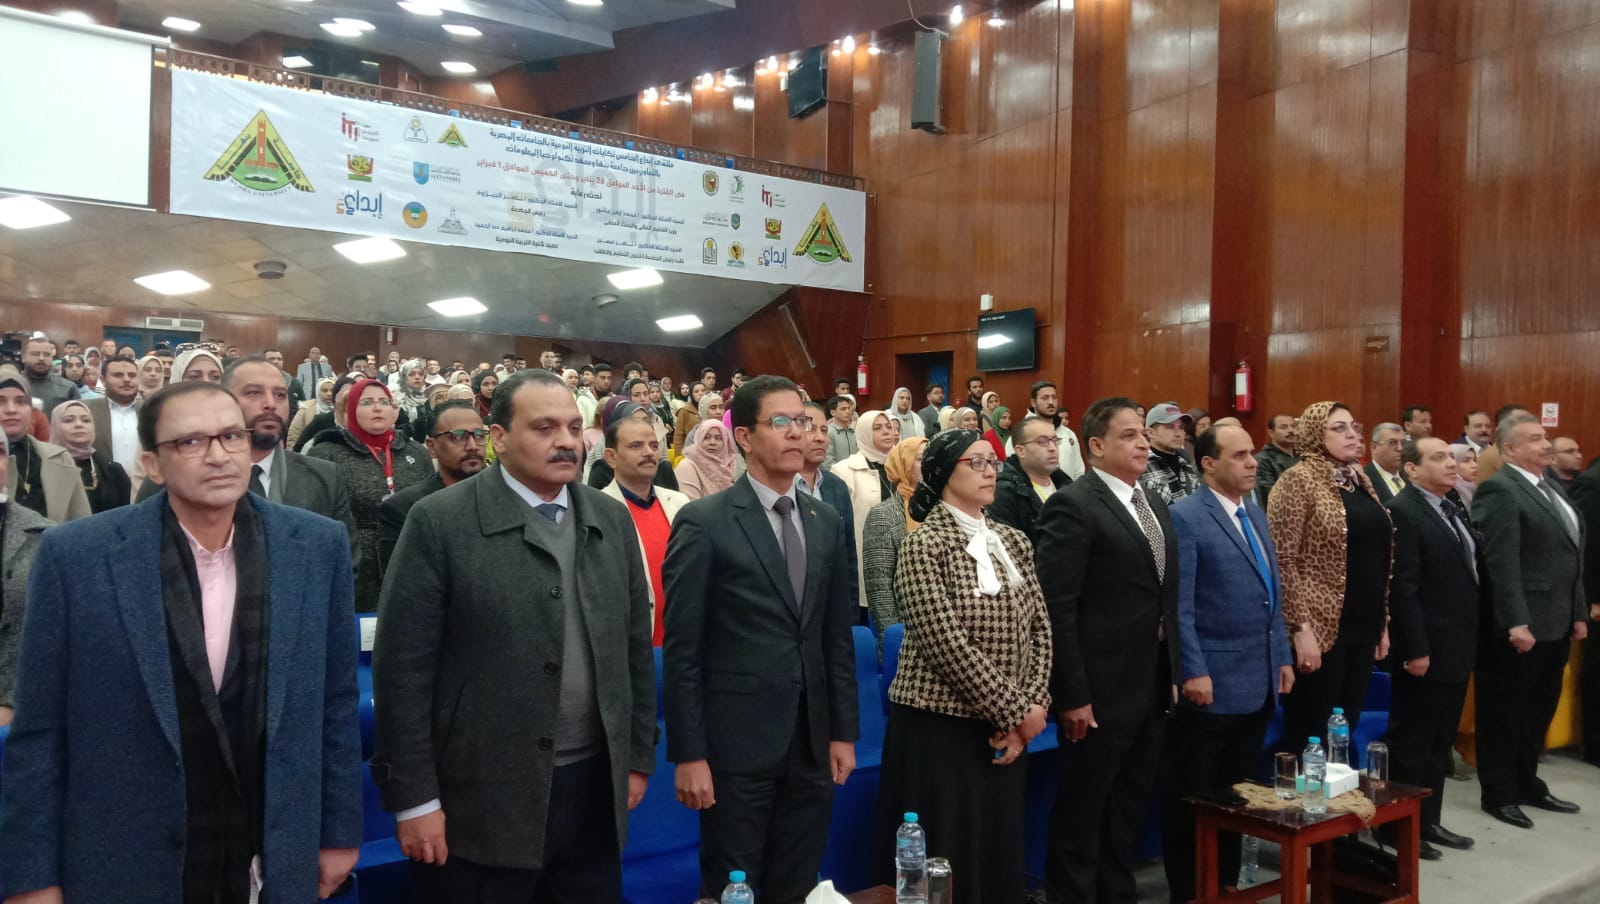 BU President witnesses the closing ceremony of the Fifth Creativity Forum for Specific Education Faculties